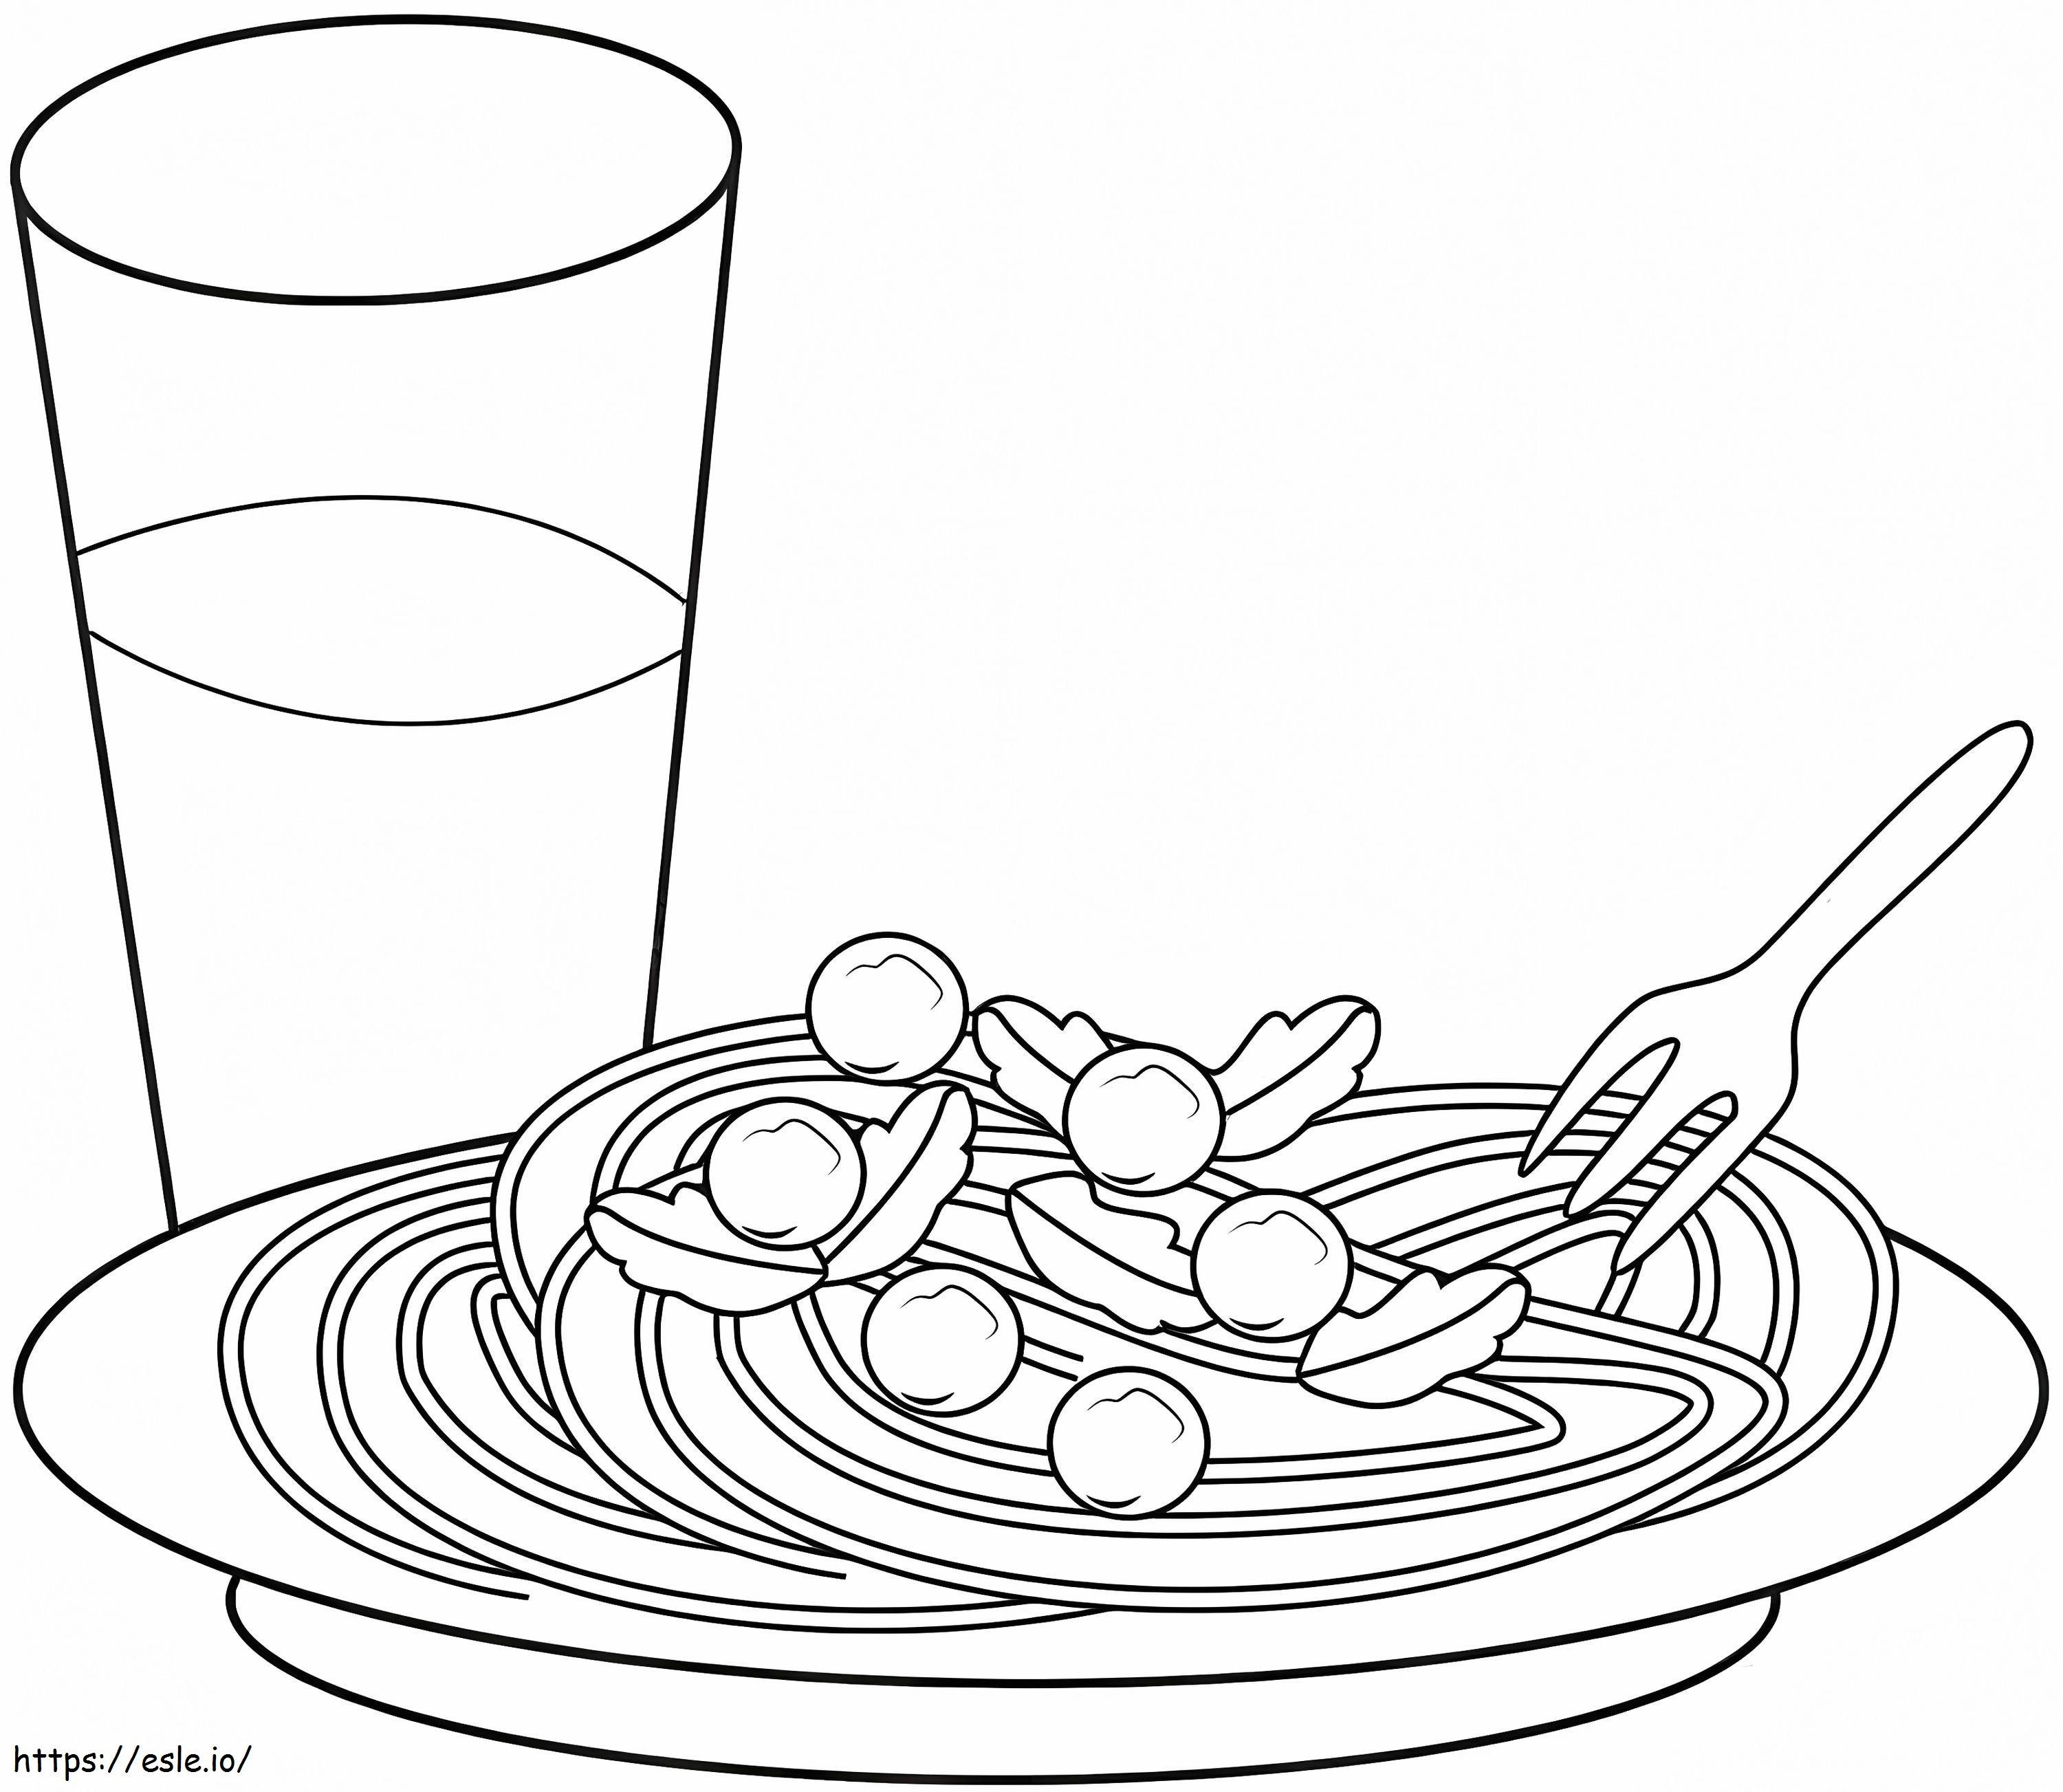 A Pasta Disc coloring page